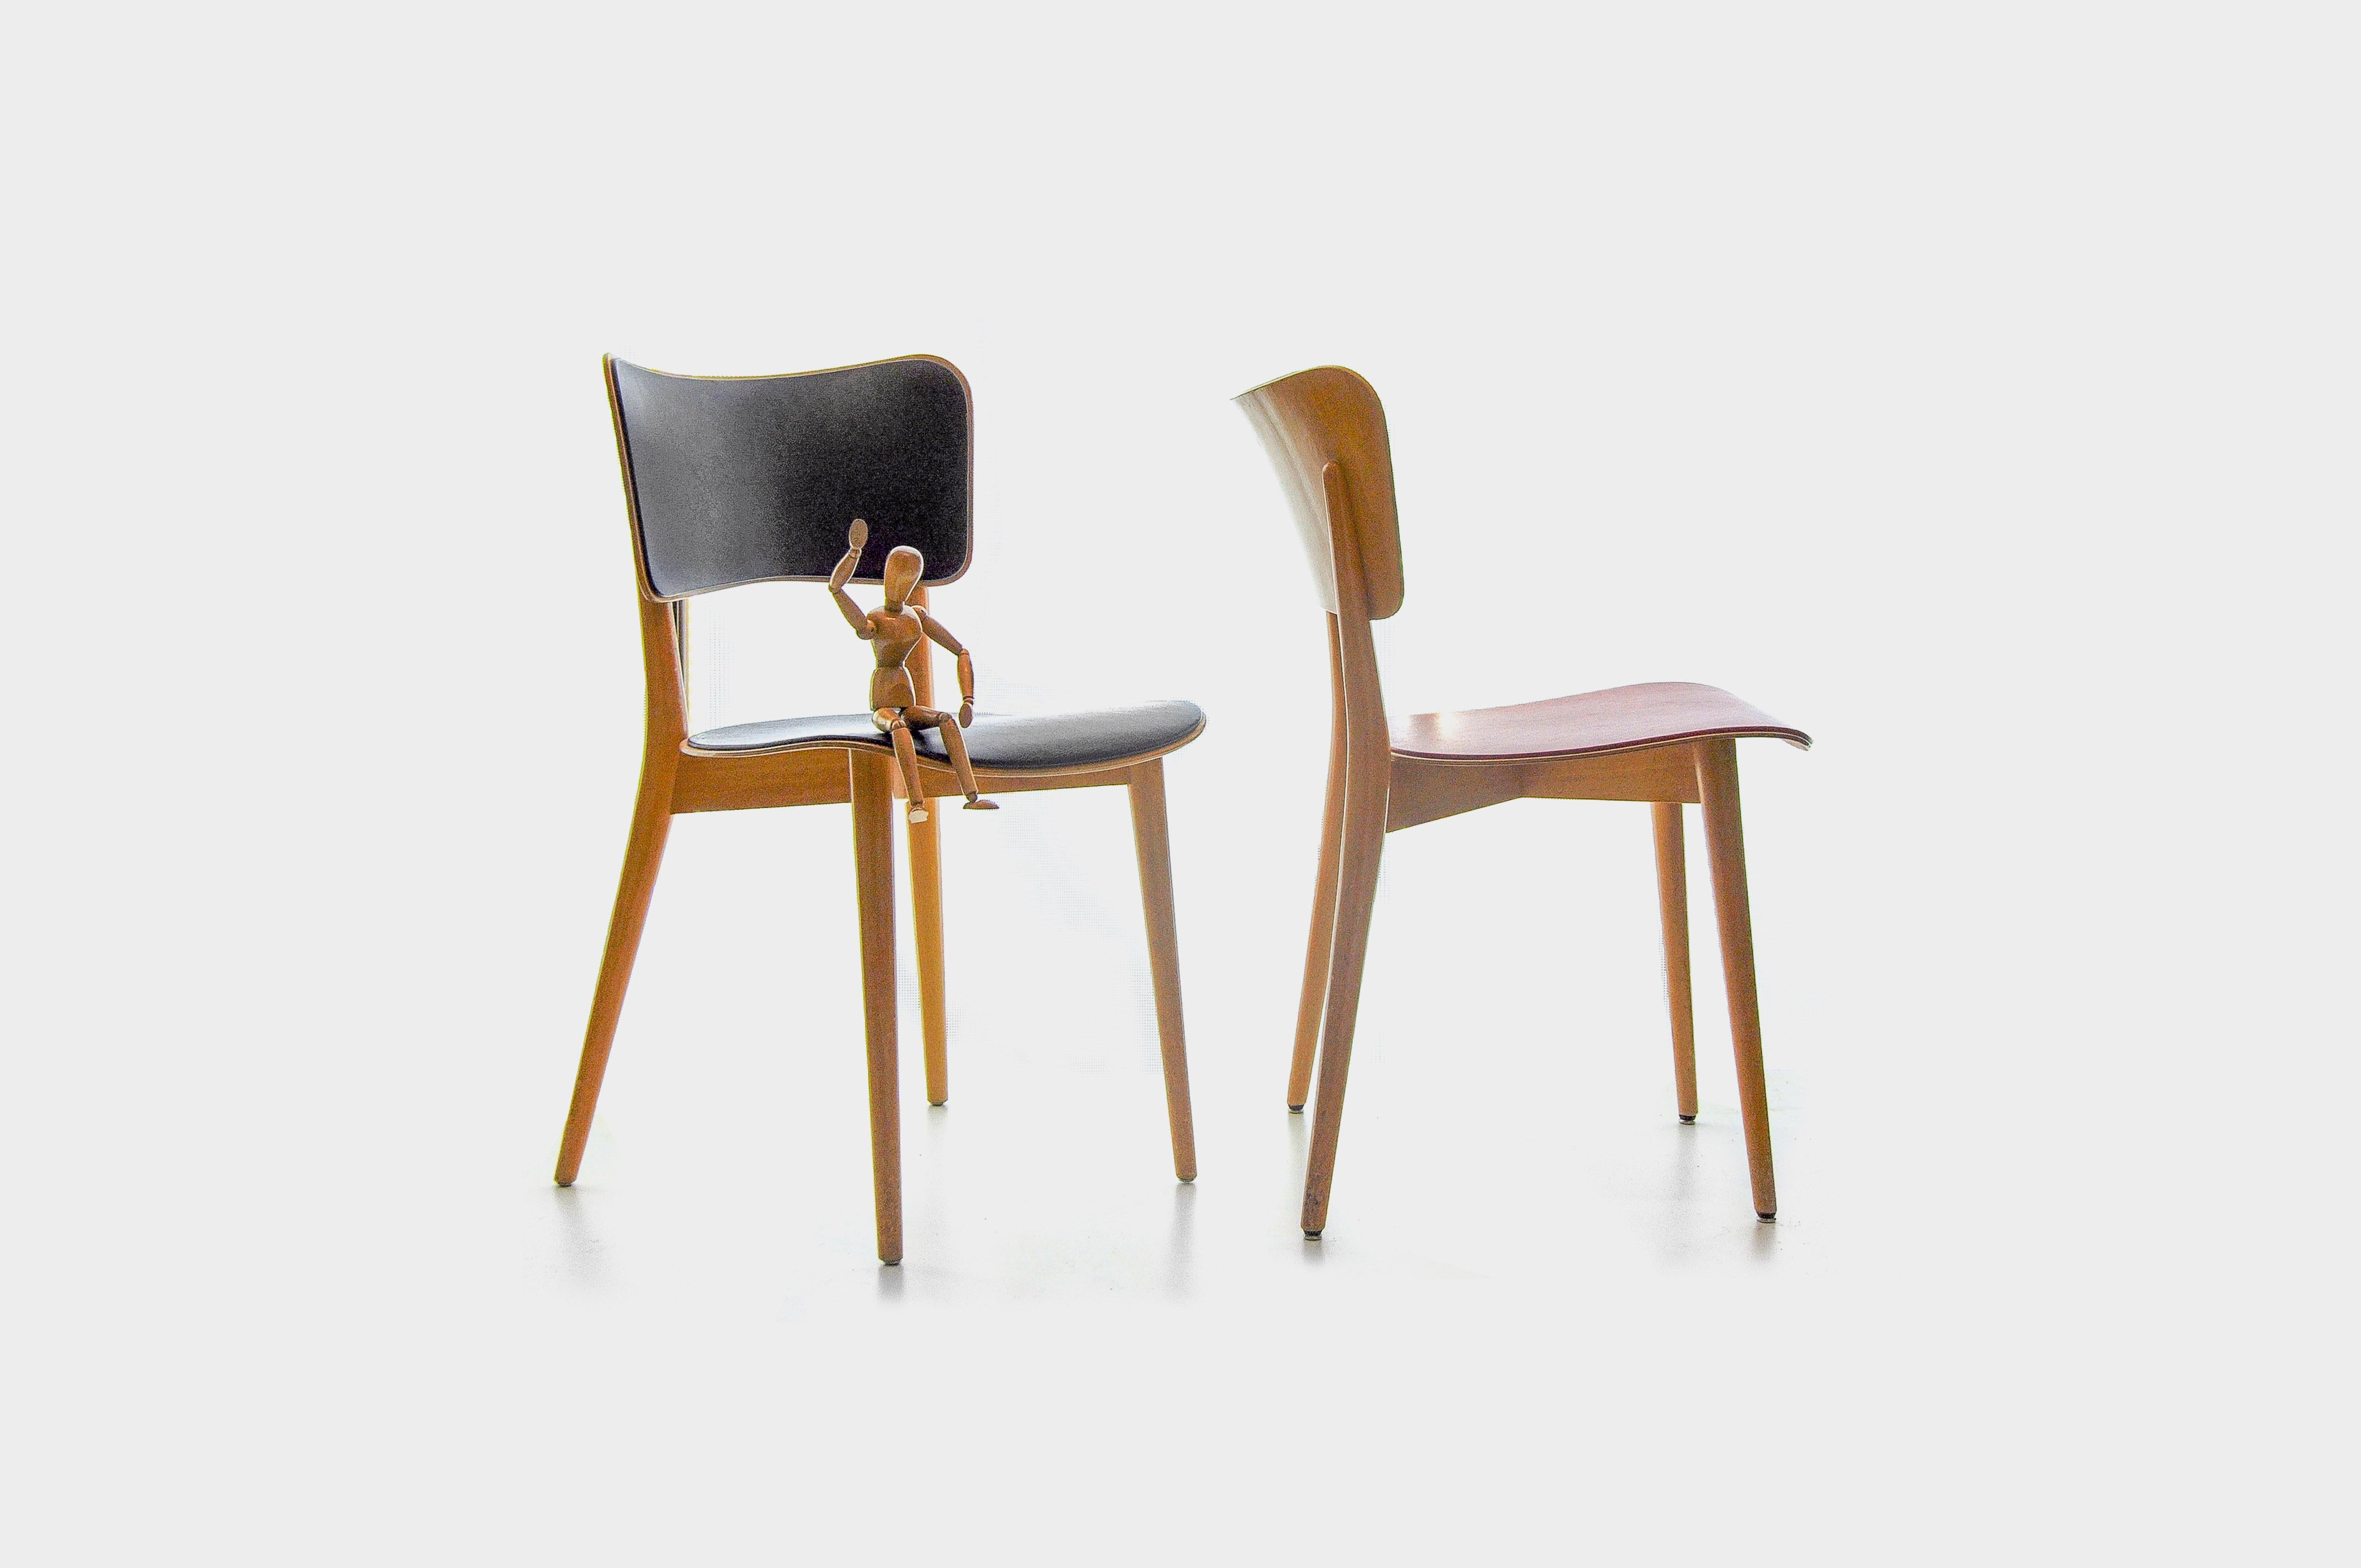 Strong and stabile but balanced and beautiful, this is how Bill's cross frame chair can be described. The leg construction with a cross frame connection supports the seat in the middle and gives the chair the greatest possible stability. The